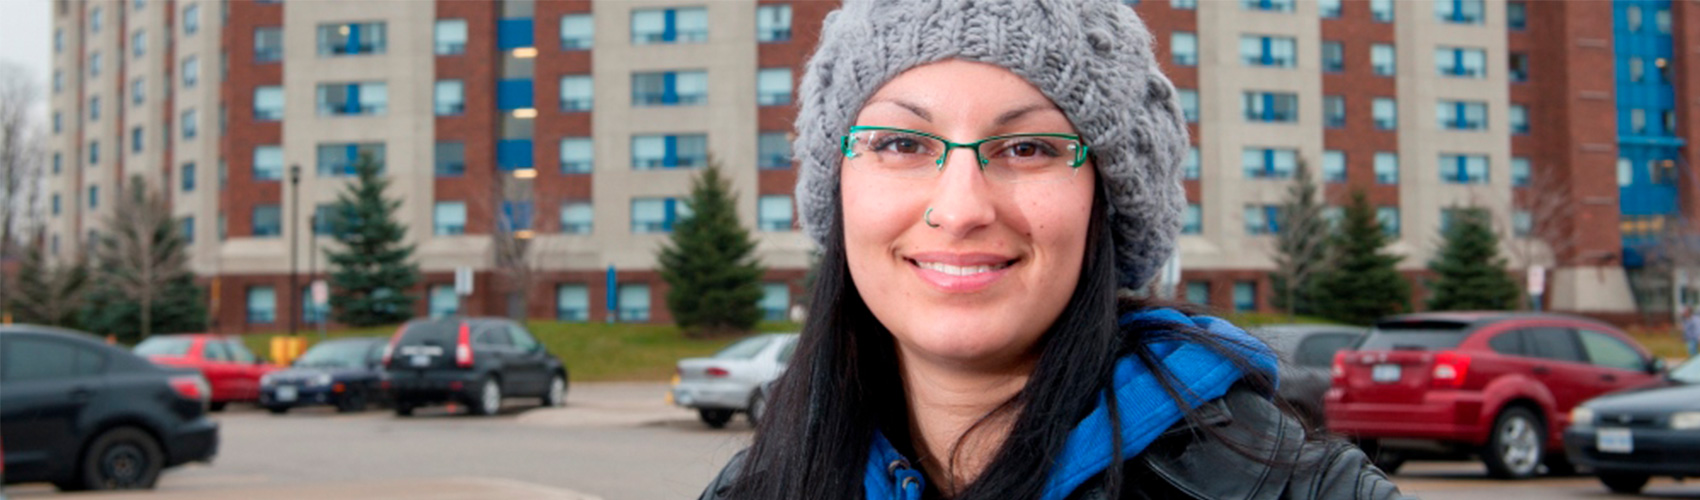 student with black hair, green glasses and a grey knit hat standing in front of Georgian College Barrie Residence